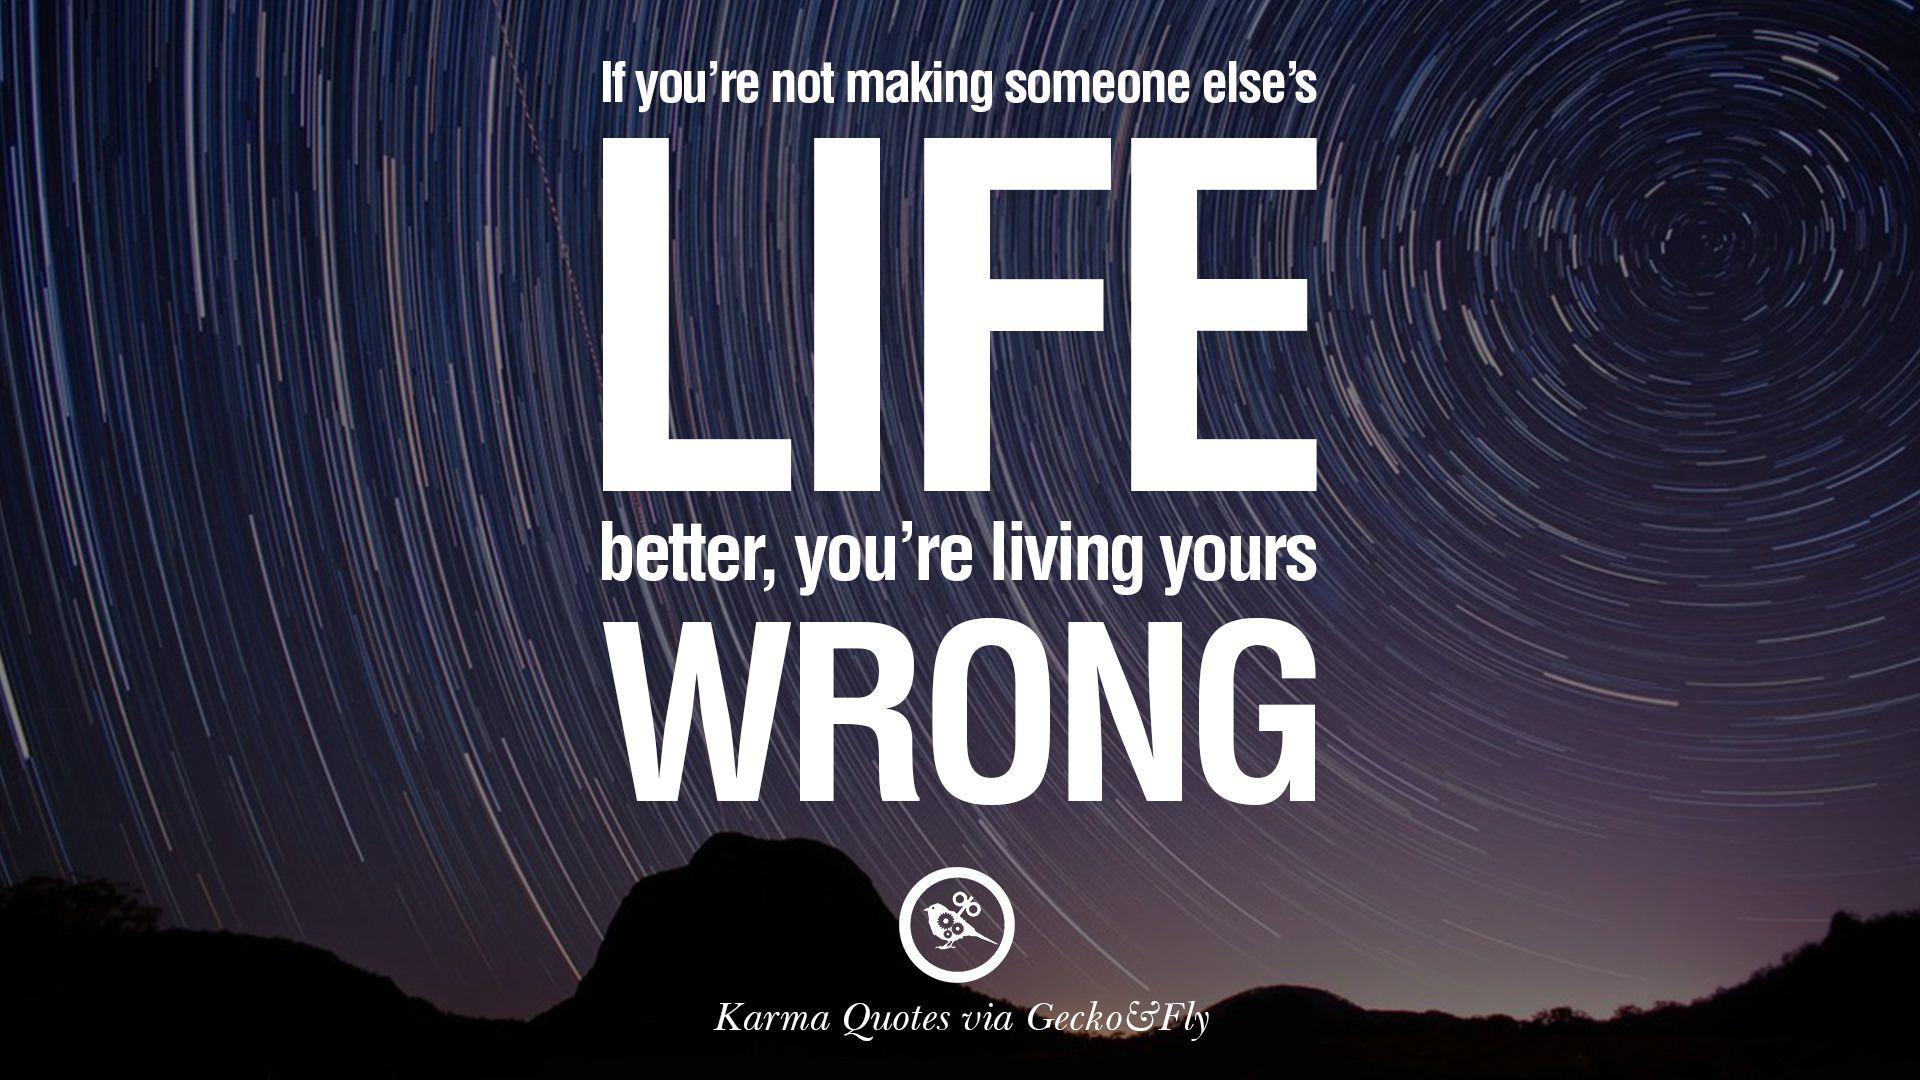 Good Karma Quotes On Relationship Revenge And Life Con Live A